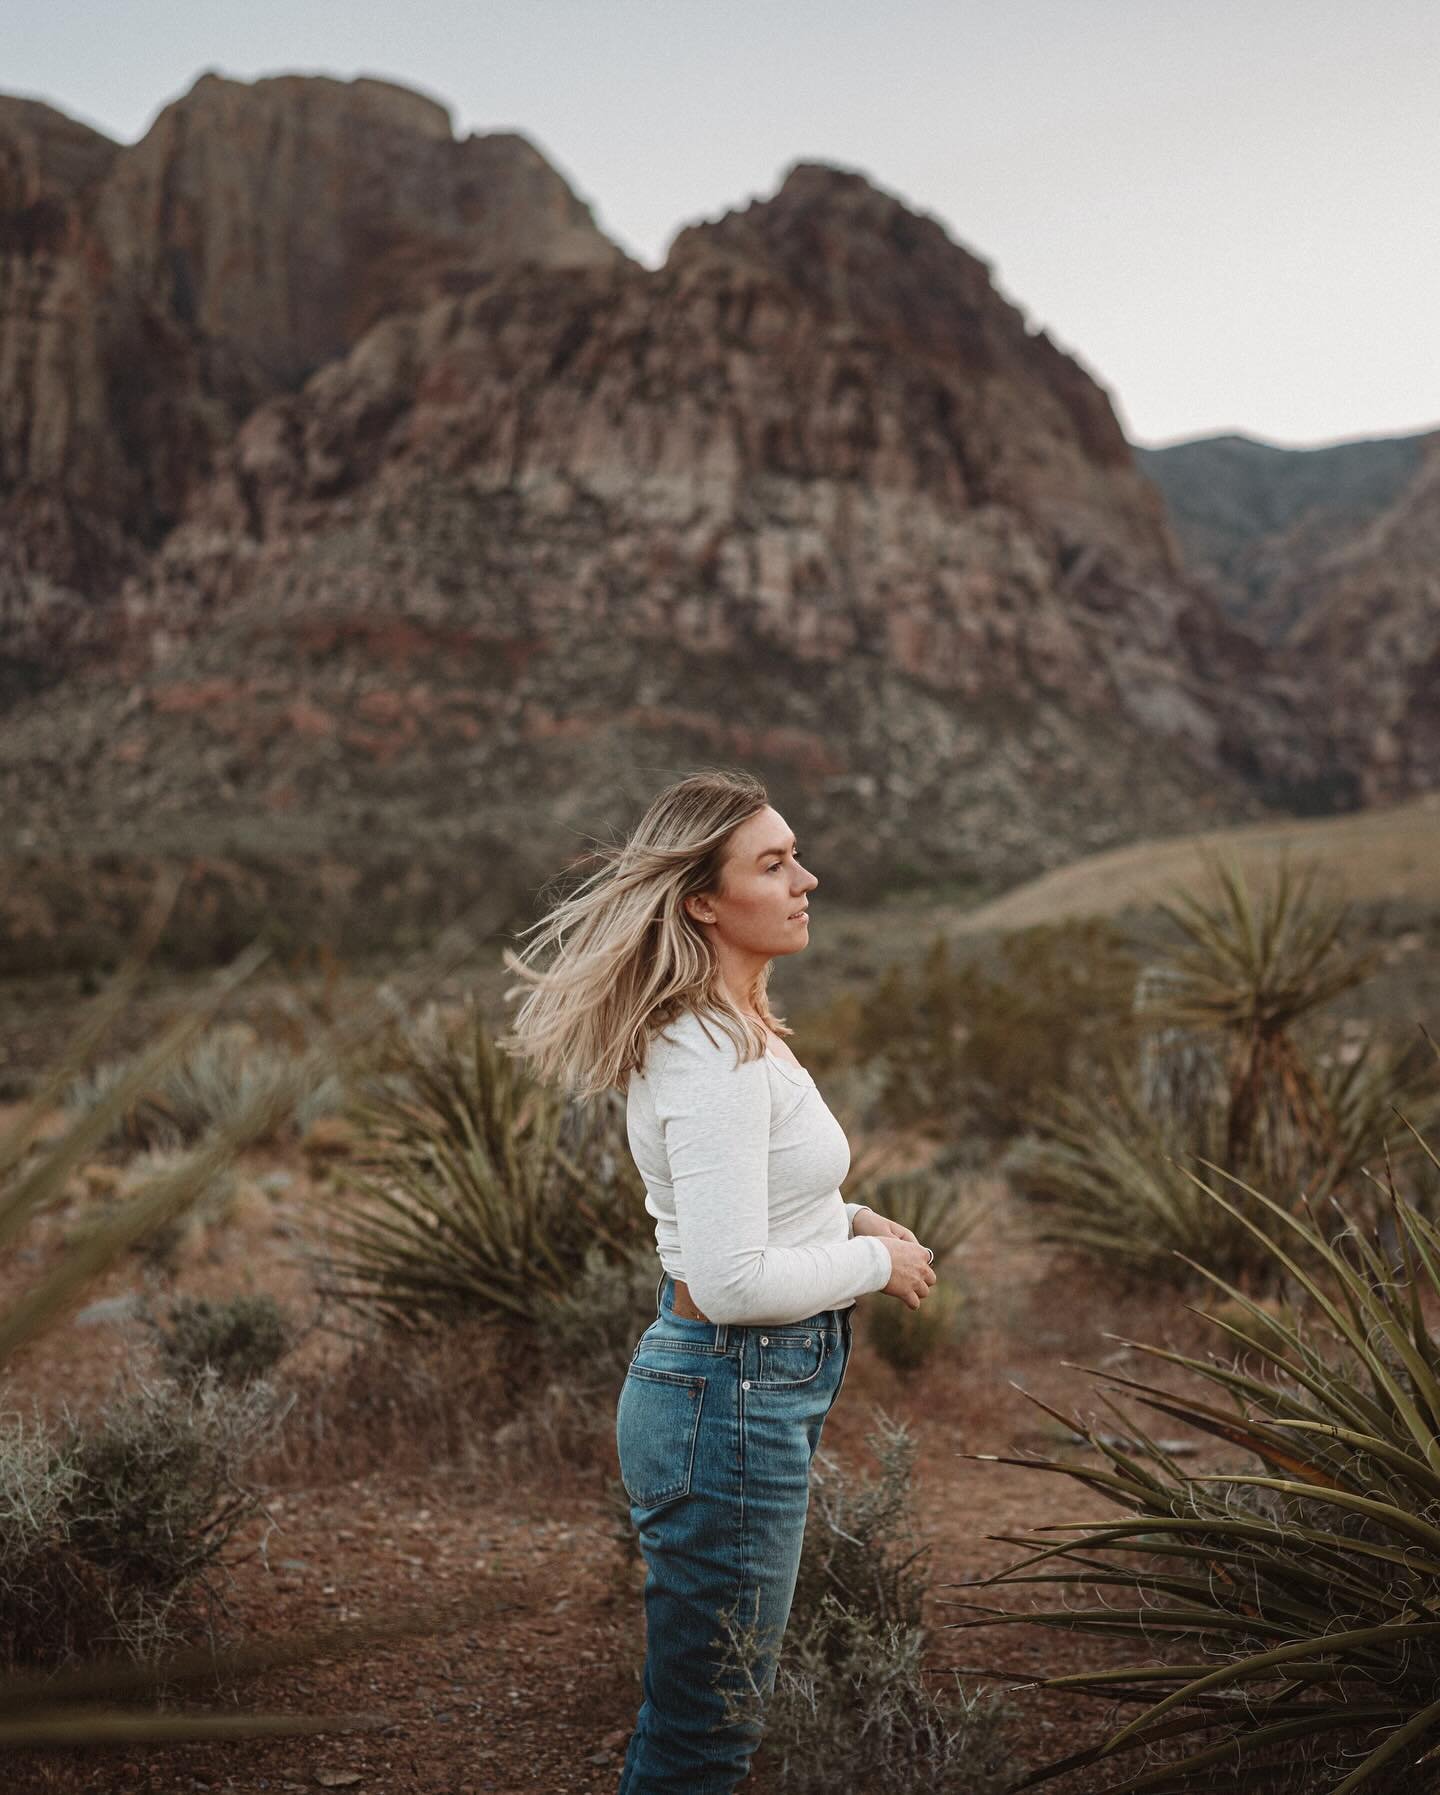 Hopped on a plane to Nevada last week for an outdoorsy solo trip shooting a fun project. Returning to the desert always feels like coming home. I love it here. 🏜️⁣
⁣
#solotravel #redrockcanyon #nevadadesert